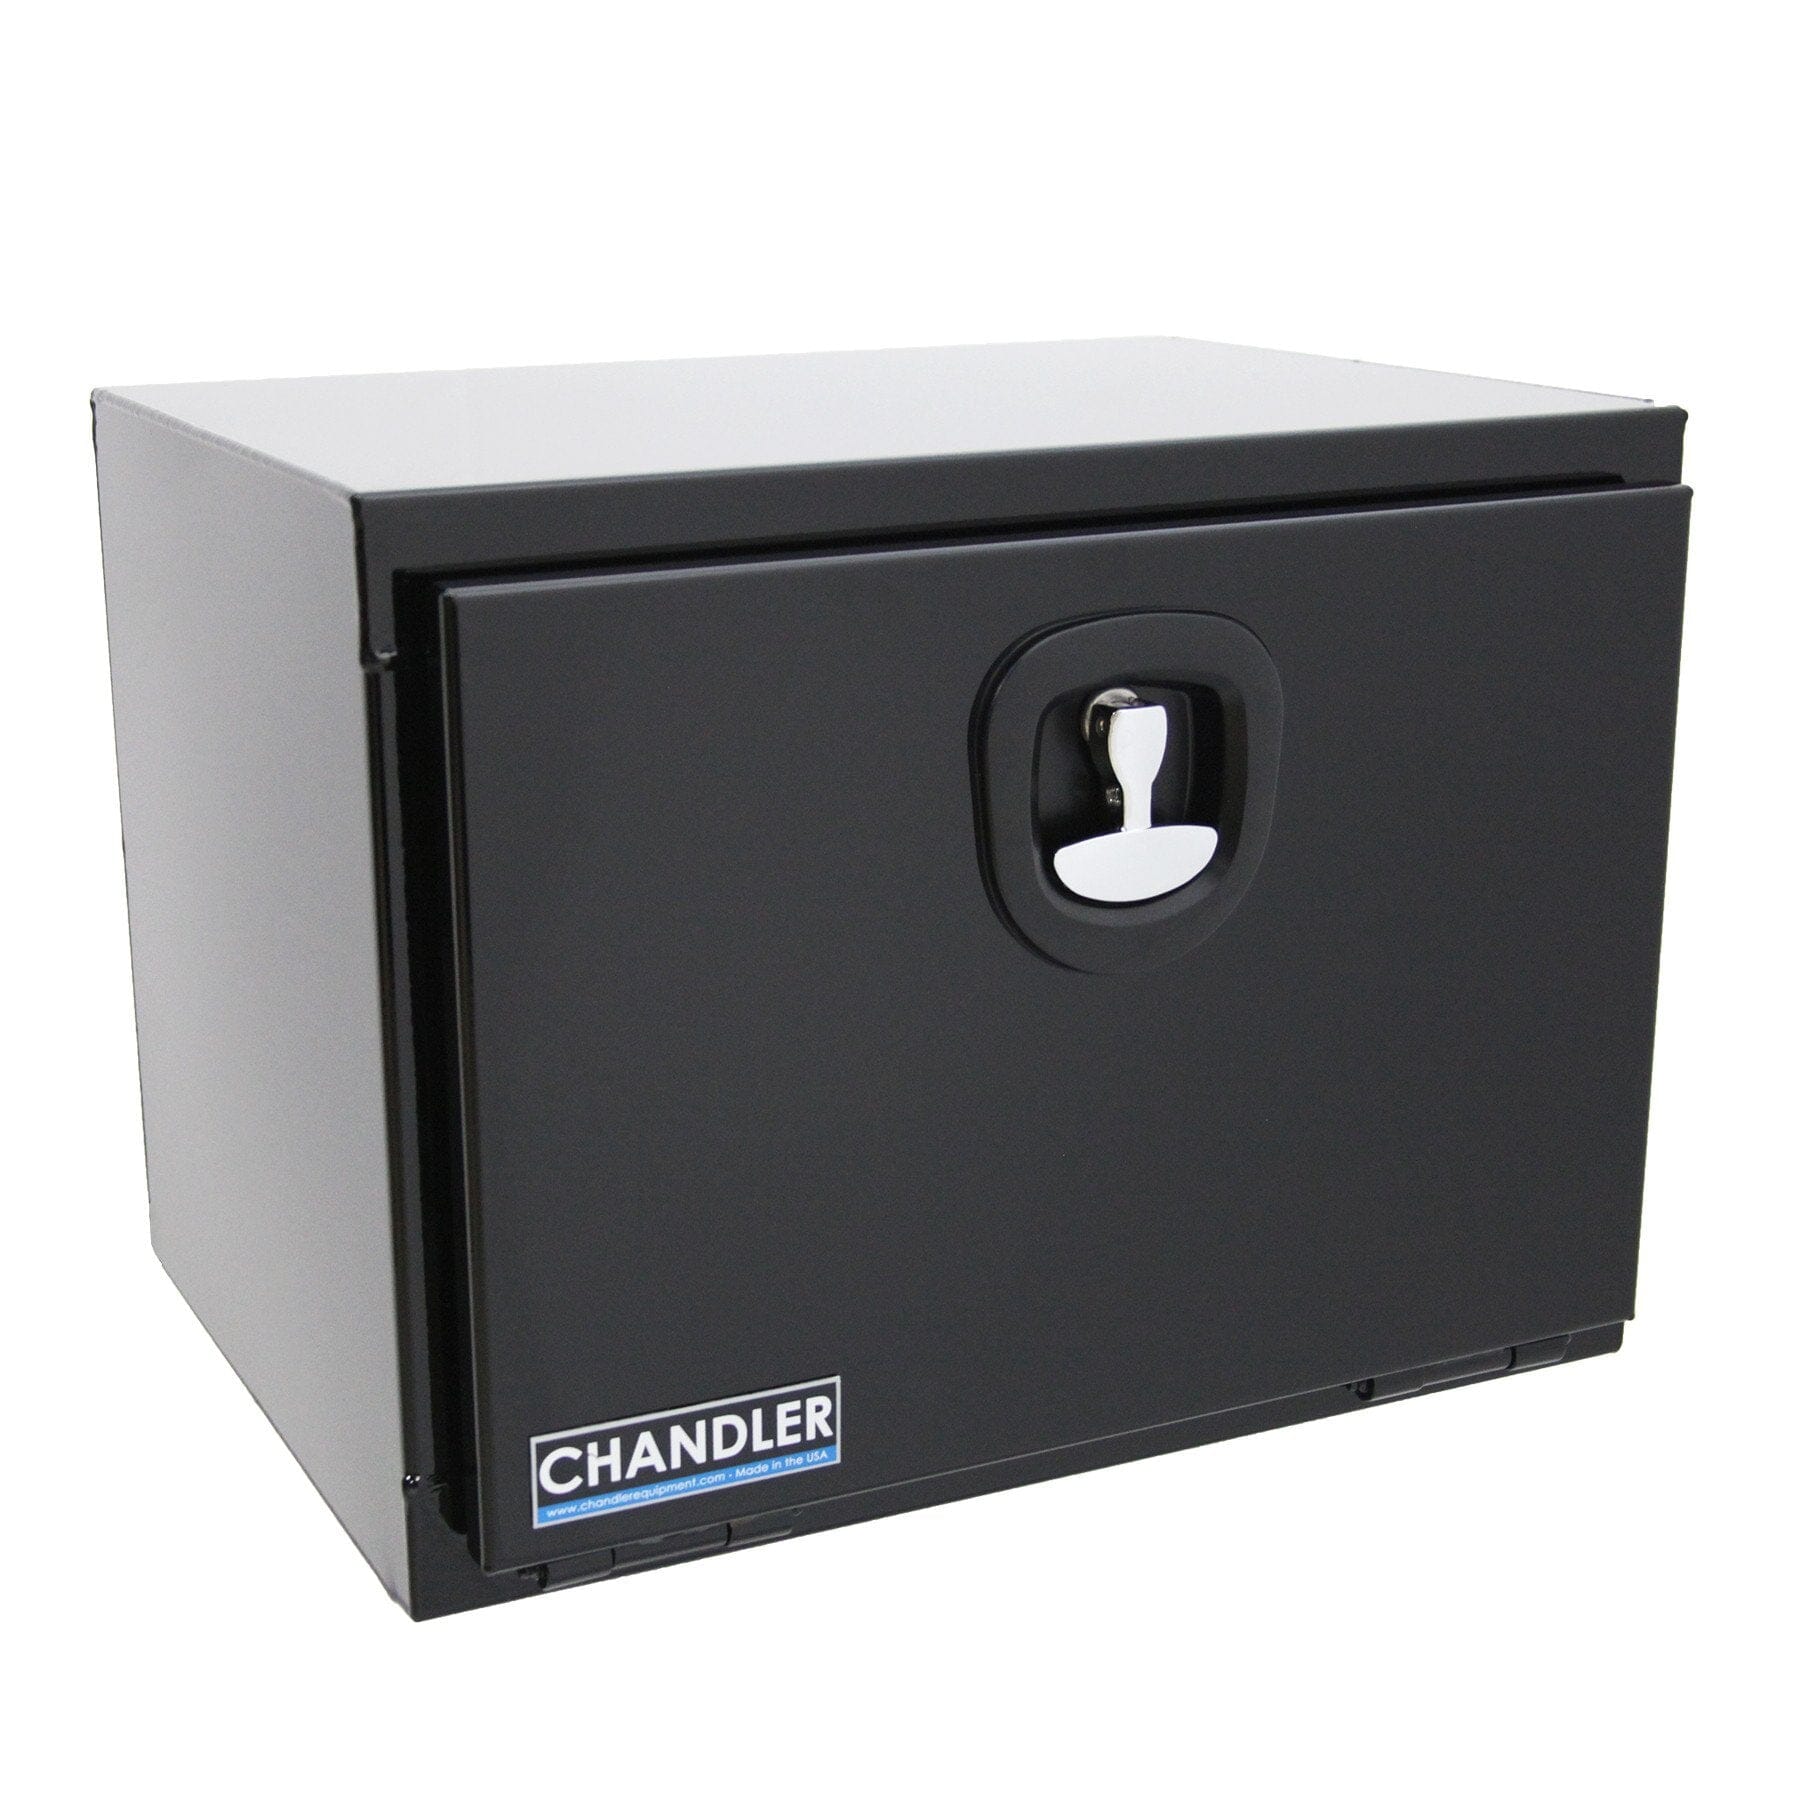 Image of Underbody Carbon Steel Flat Bed Toolbox | Chandler Truck Accessories